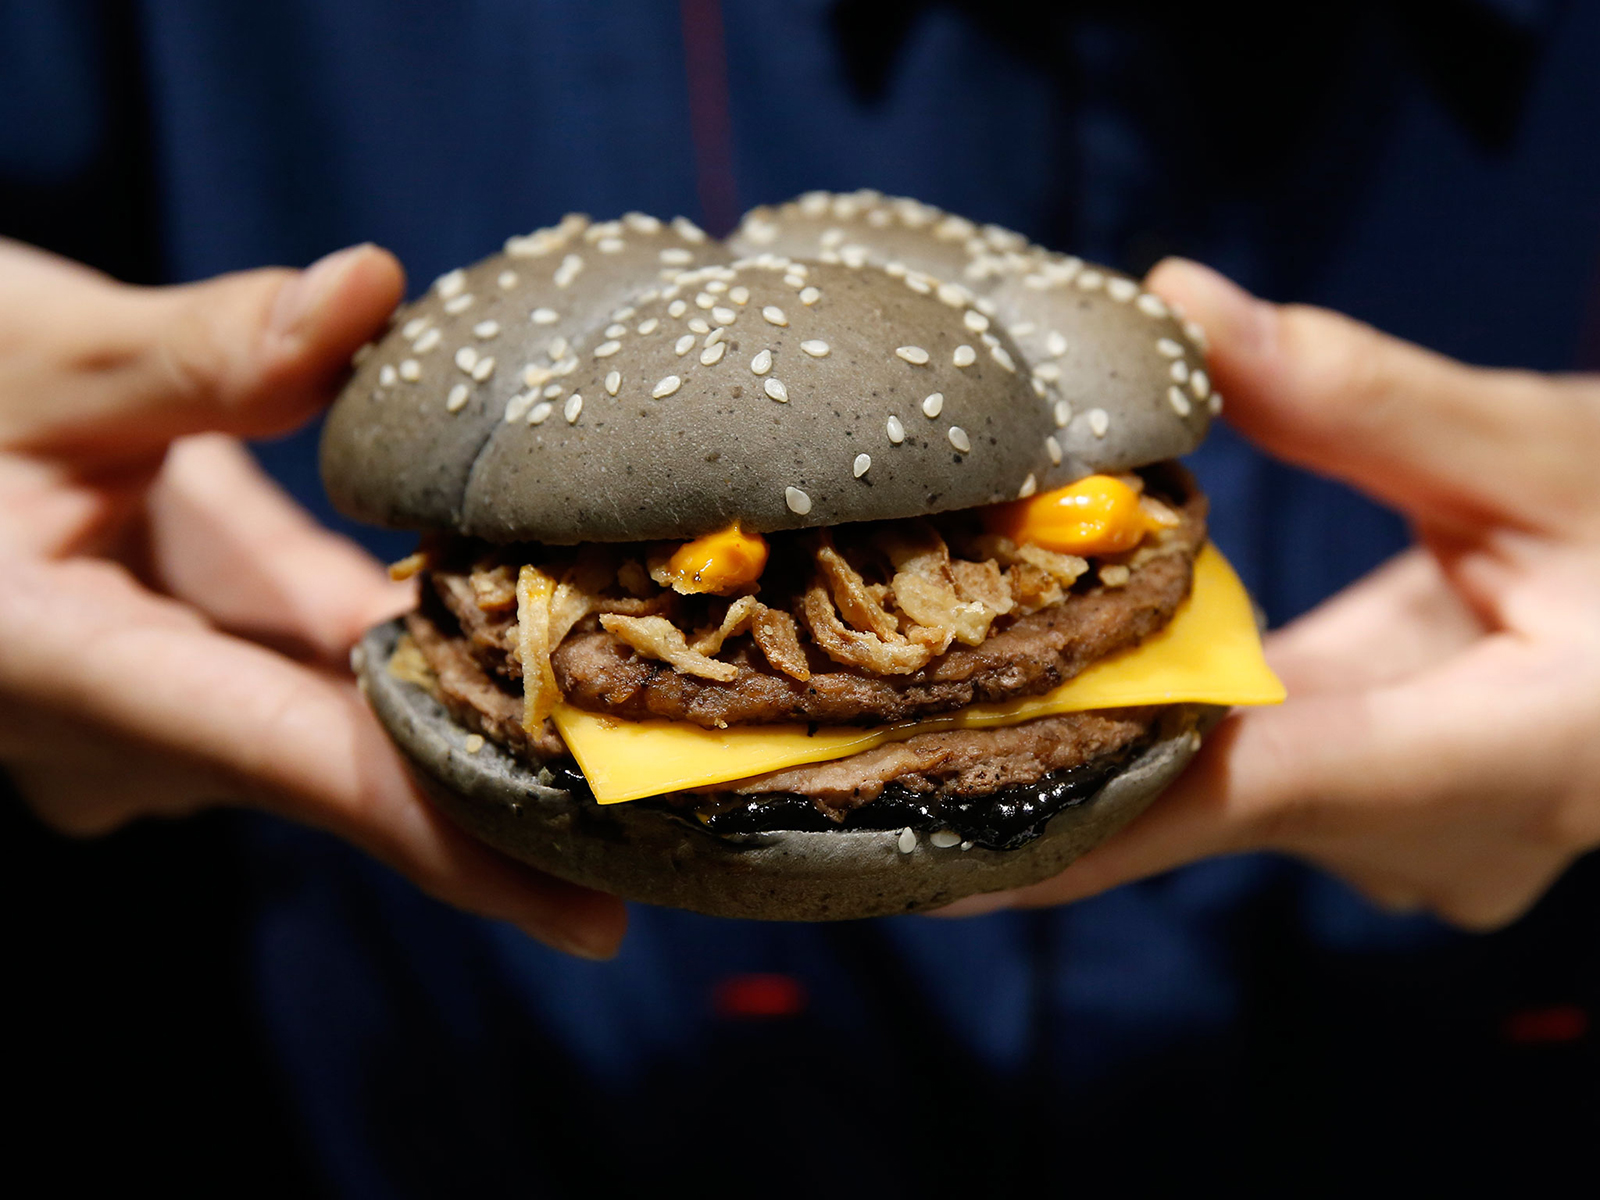 An employee of McDonald’s Japan holds a “squid ink” burger at one of the fast food outlets.